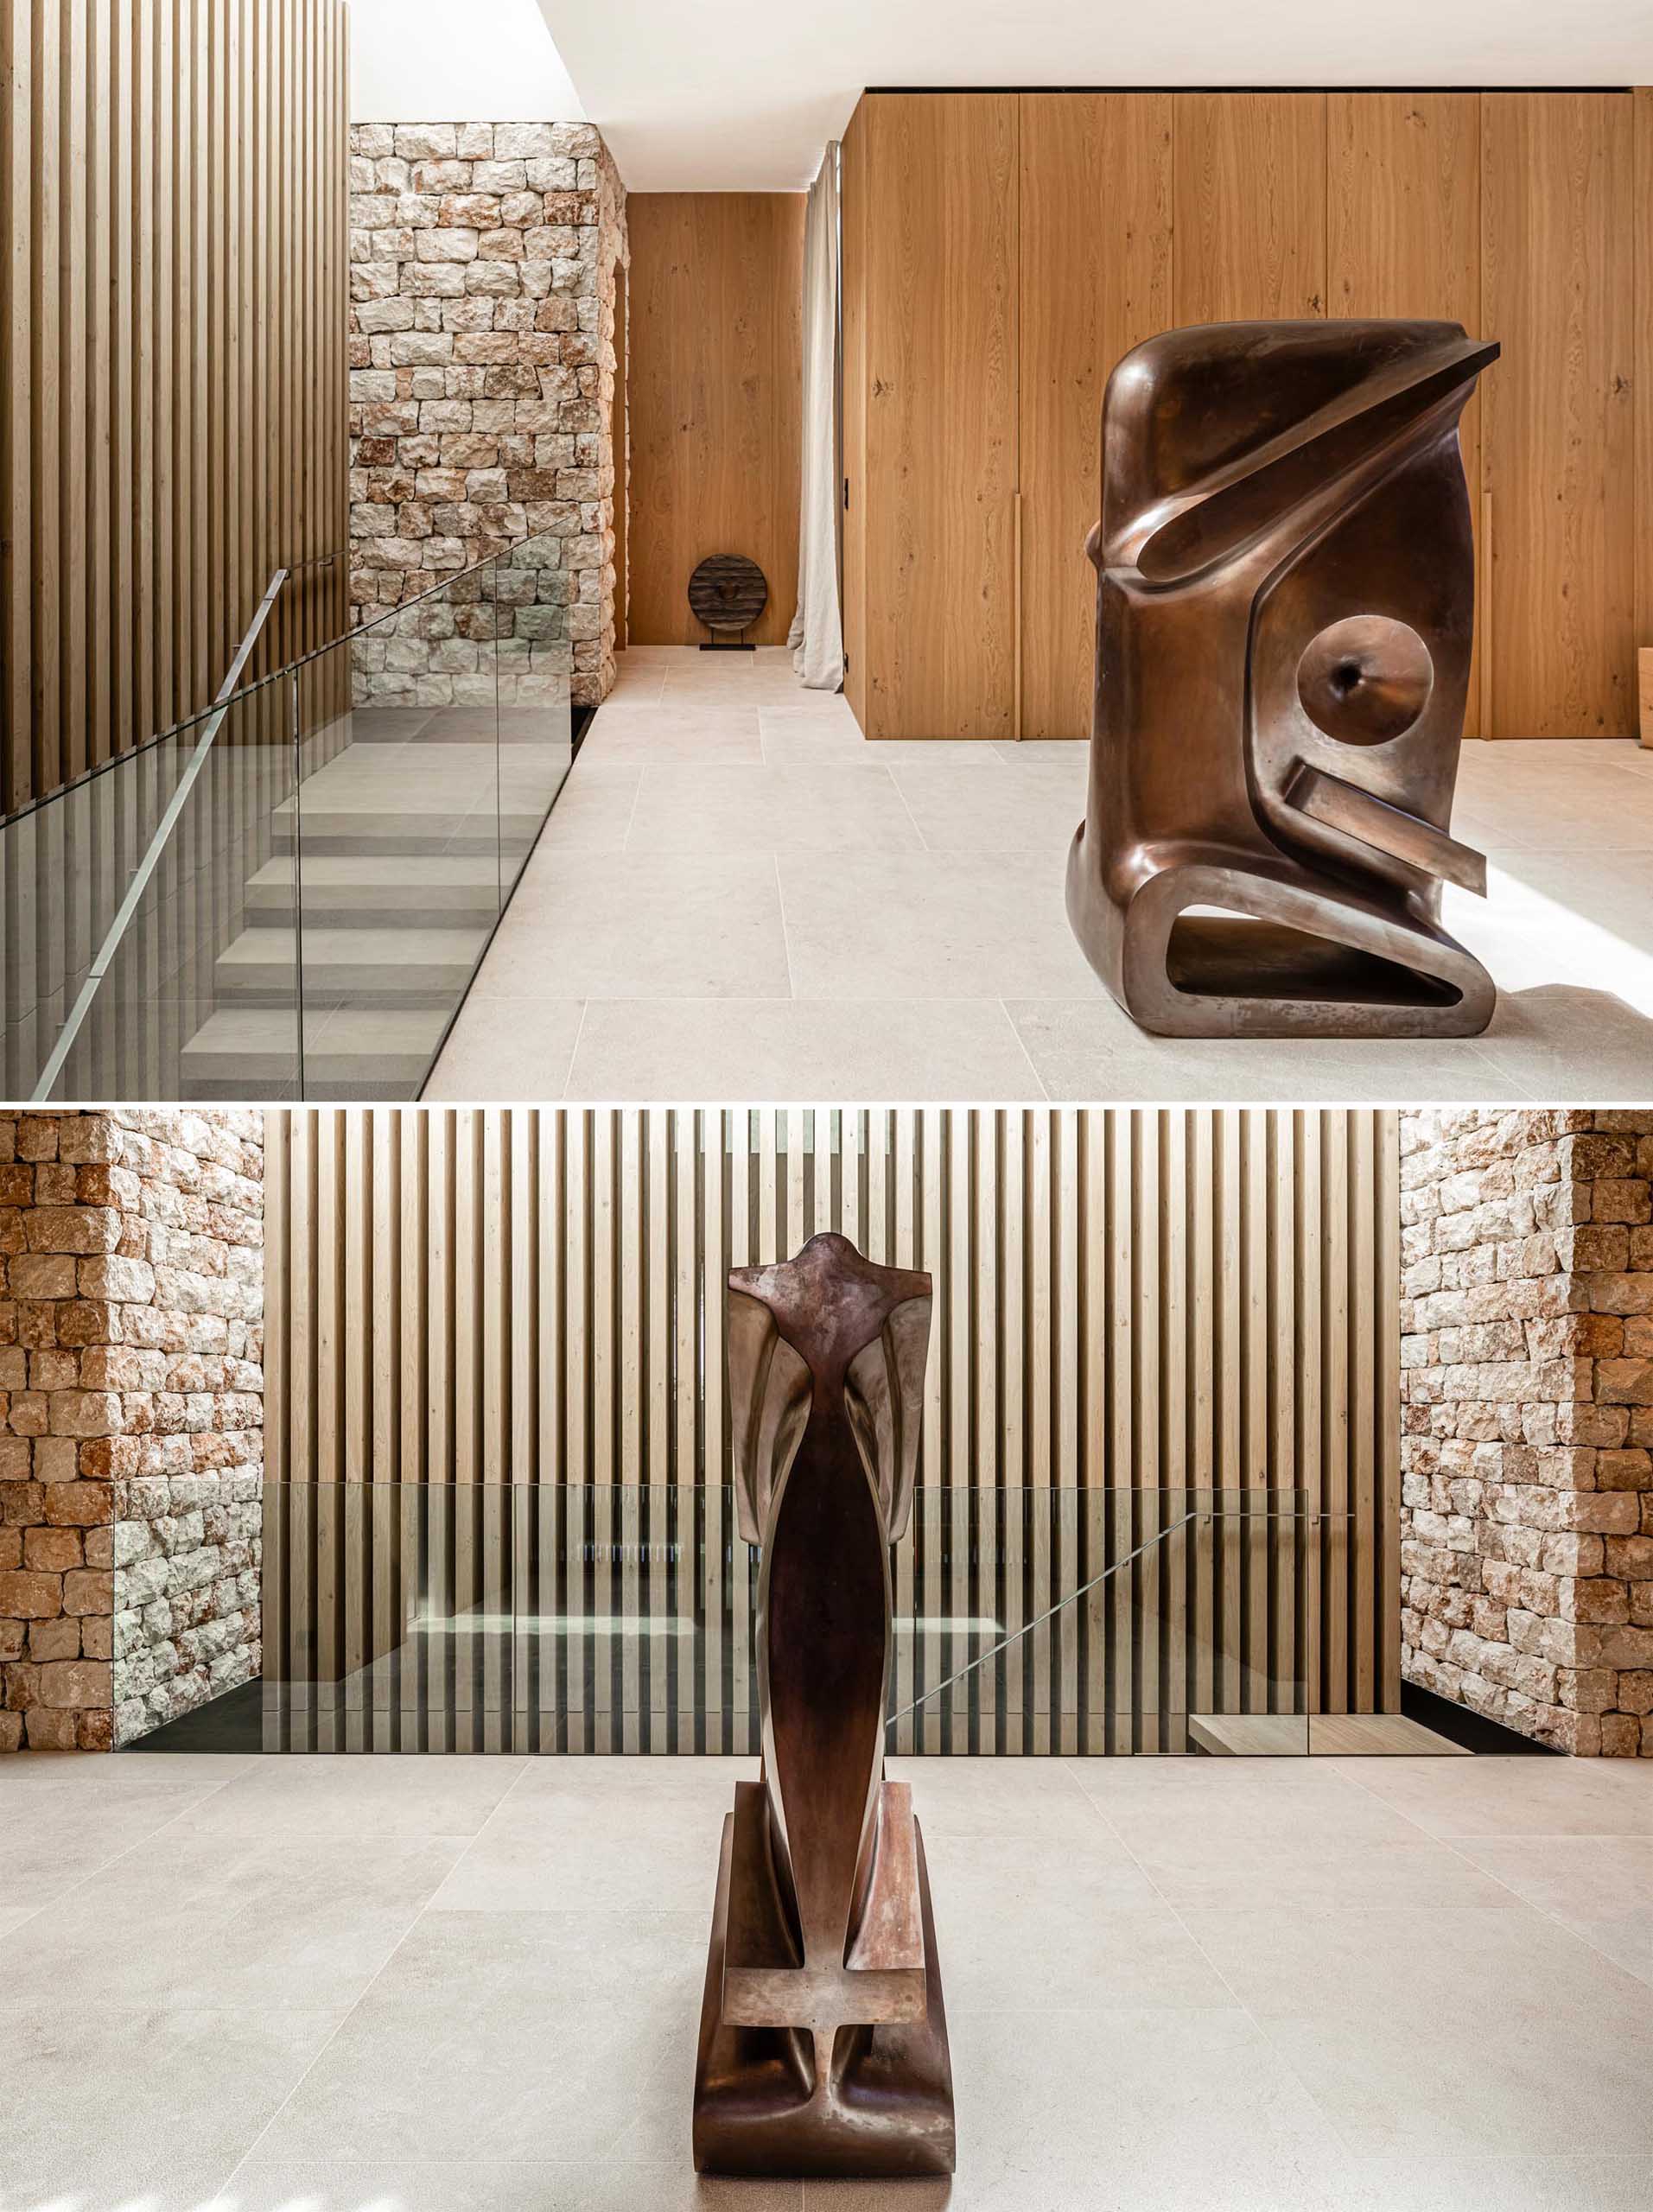 Stepping inside this modern home and an abstract bronze angel statue is facing the view with a position in the entrance hall, while stairs connect to the lower areas of the home, where the living room, dining room, and kitchen can be found.